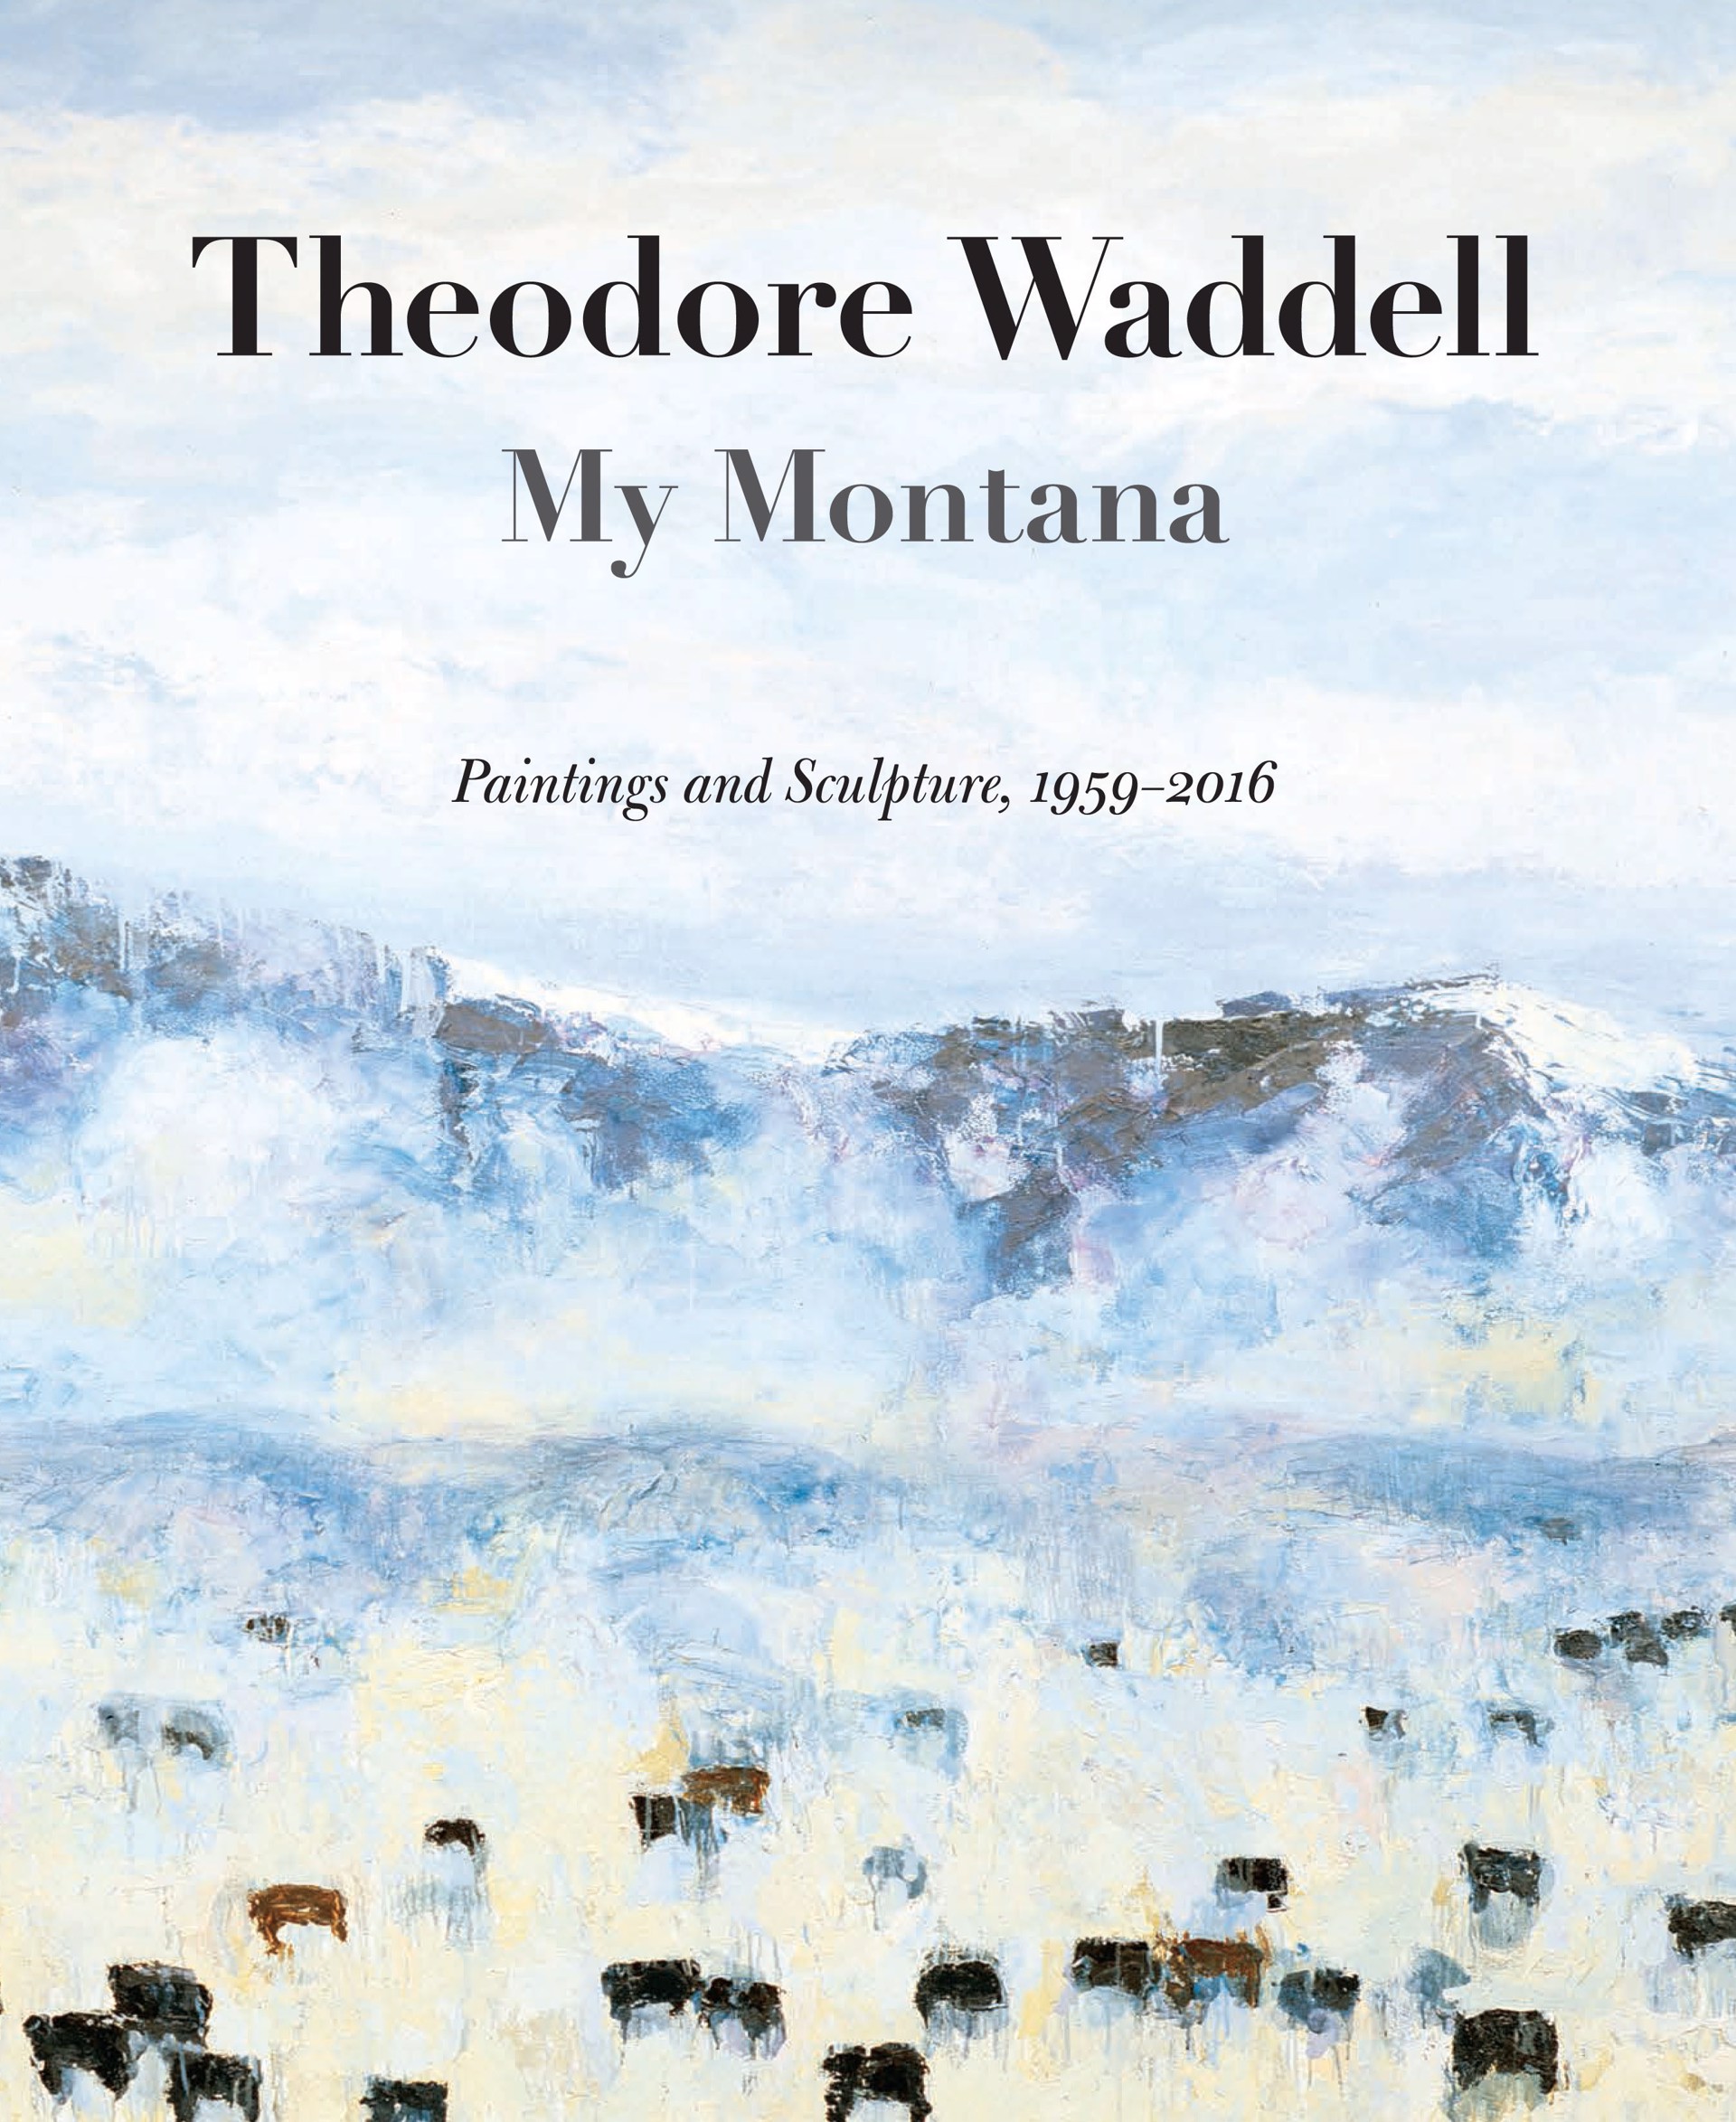 My Montana - Paintings and Sculpture, 1959-2016 by Theodore Waddell